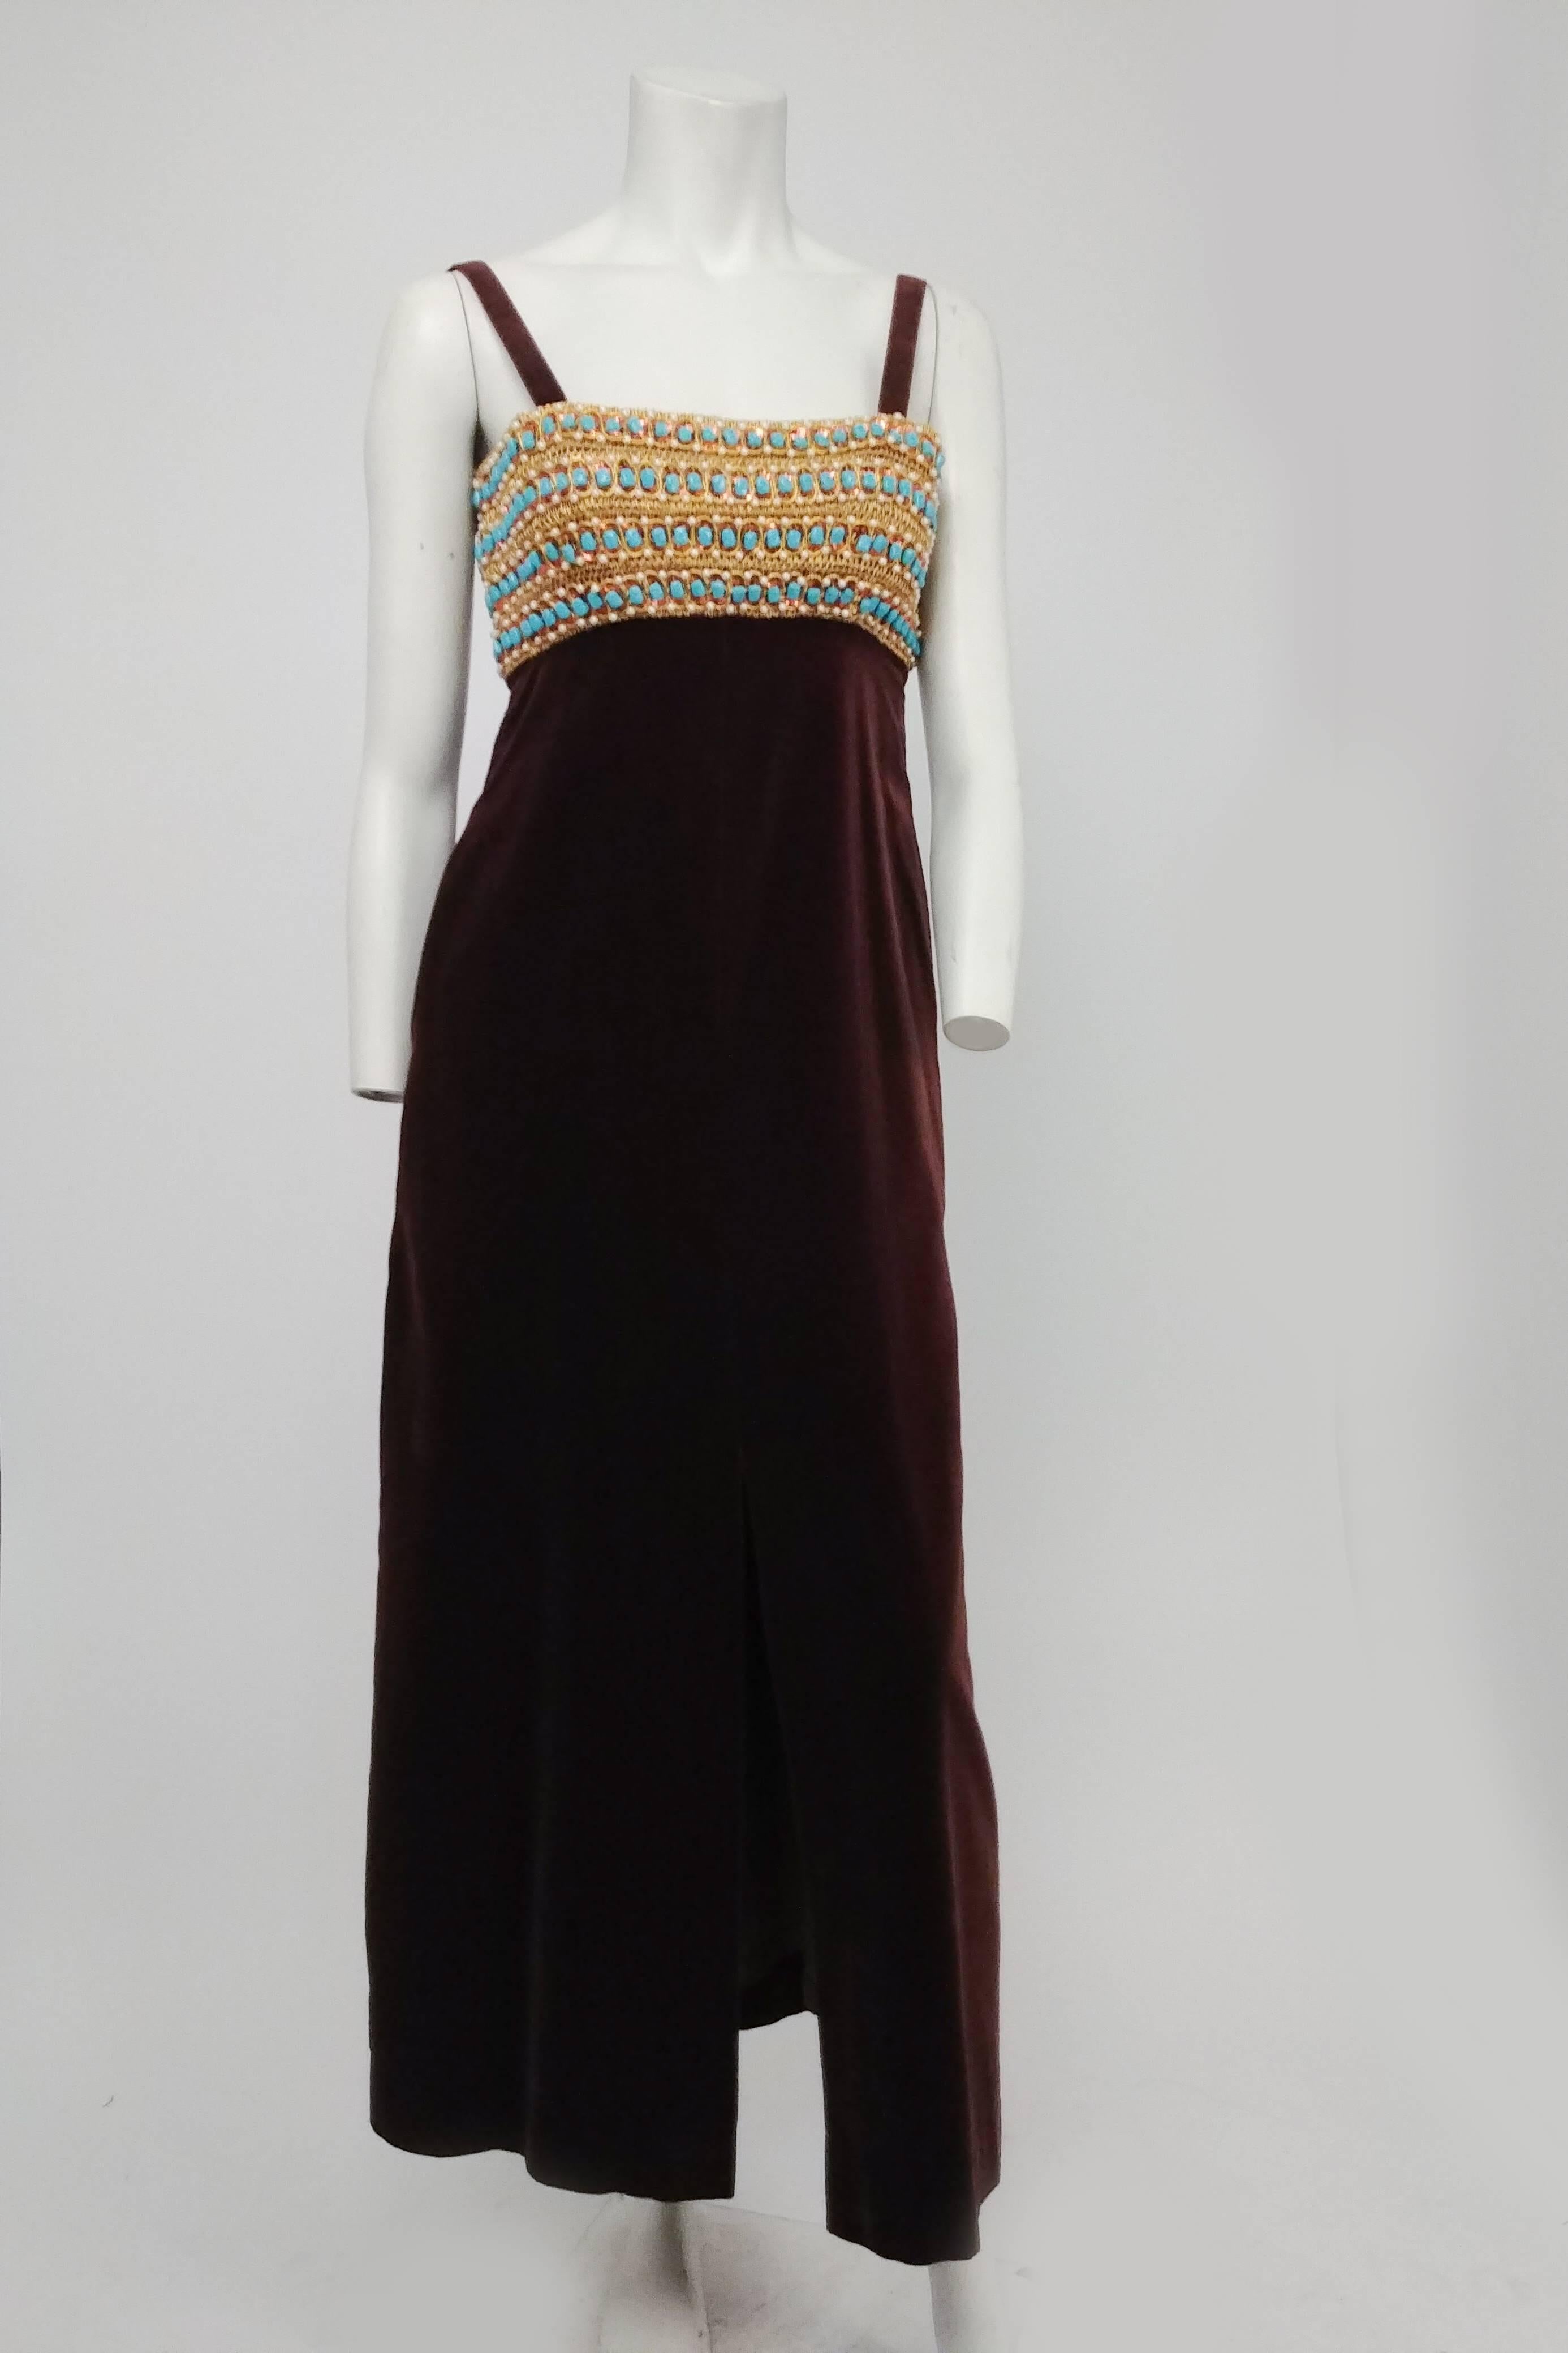 Brown Velvet Beaded Maxi Dress & Bolero, 1960s. Empire waist maxi-length dress completely beaded at bodice. Slit up front seam for ease of movement. Long-sleeve matching bolero with matching beaded trim. 